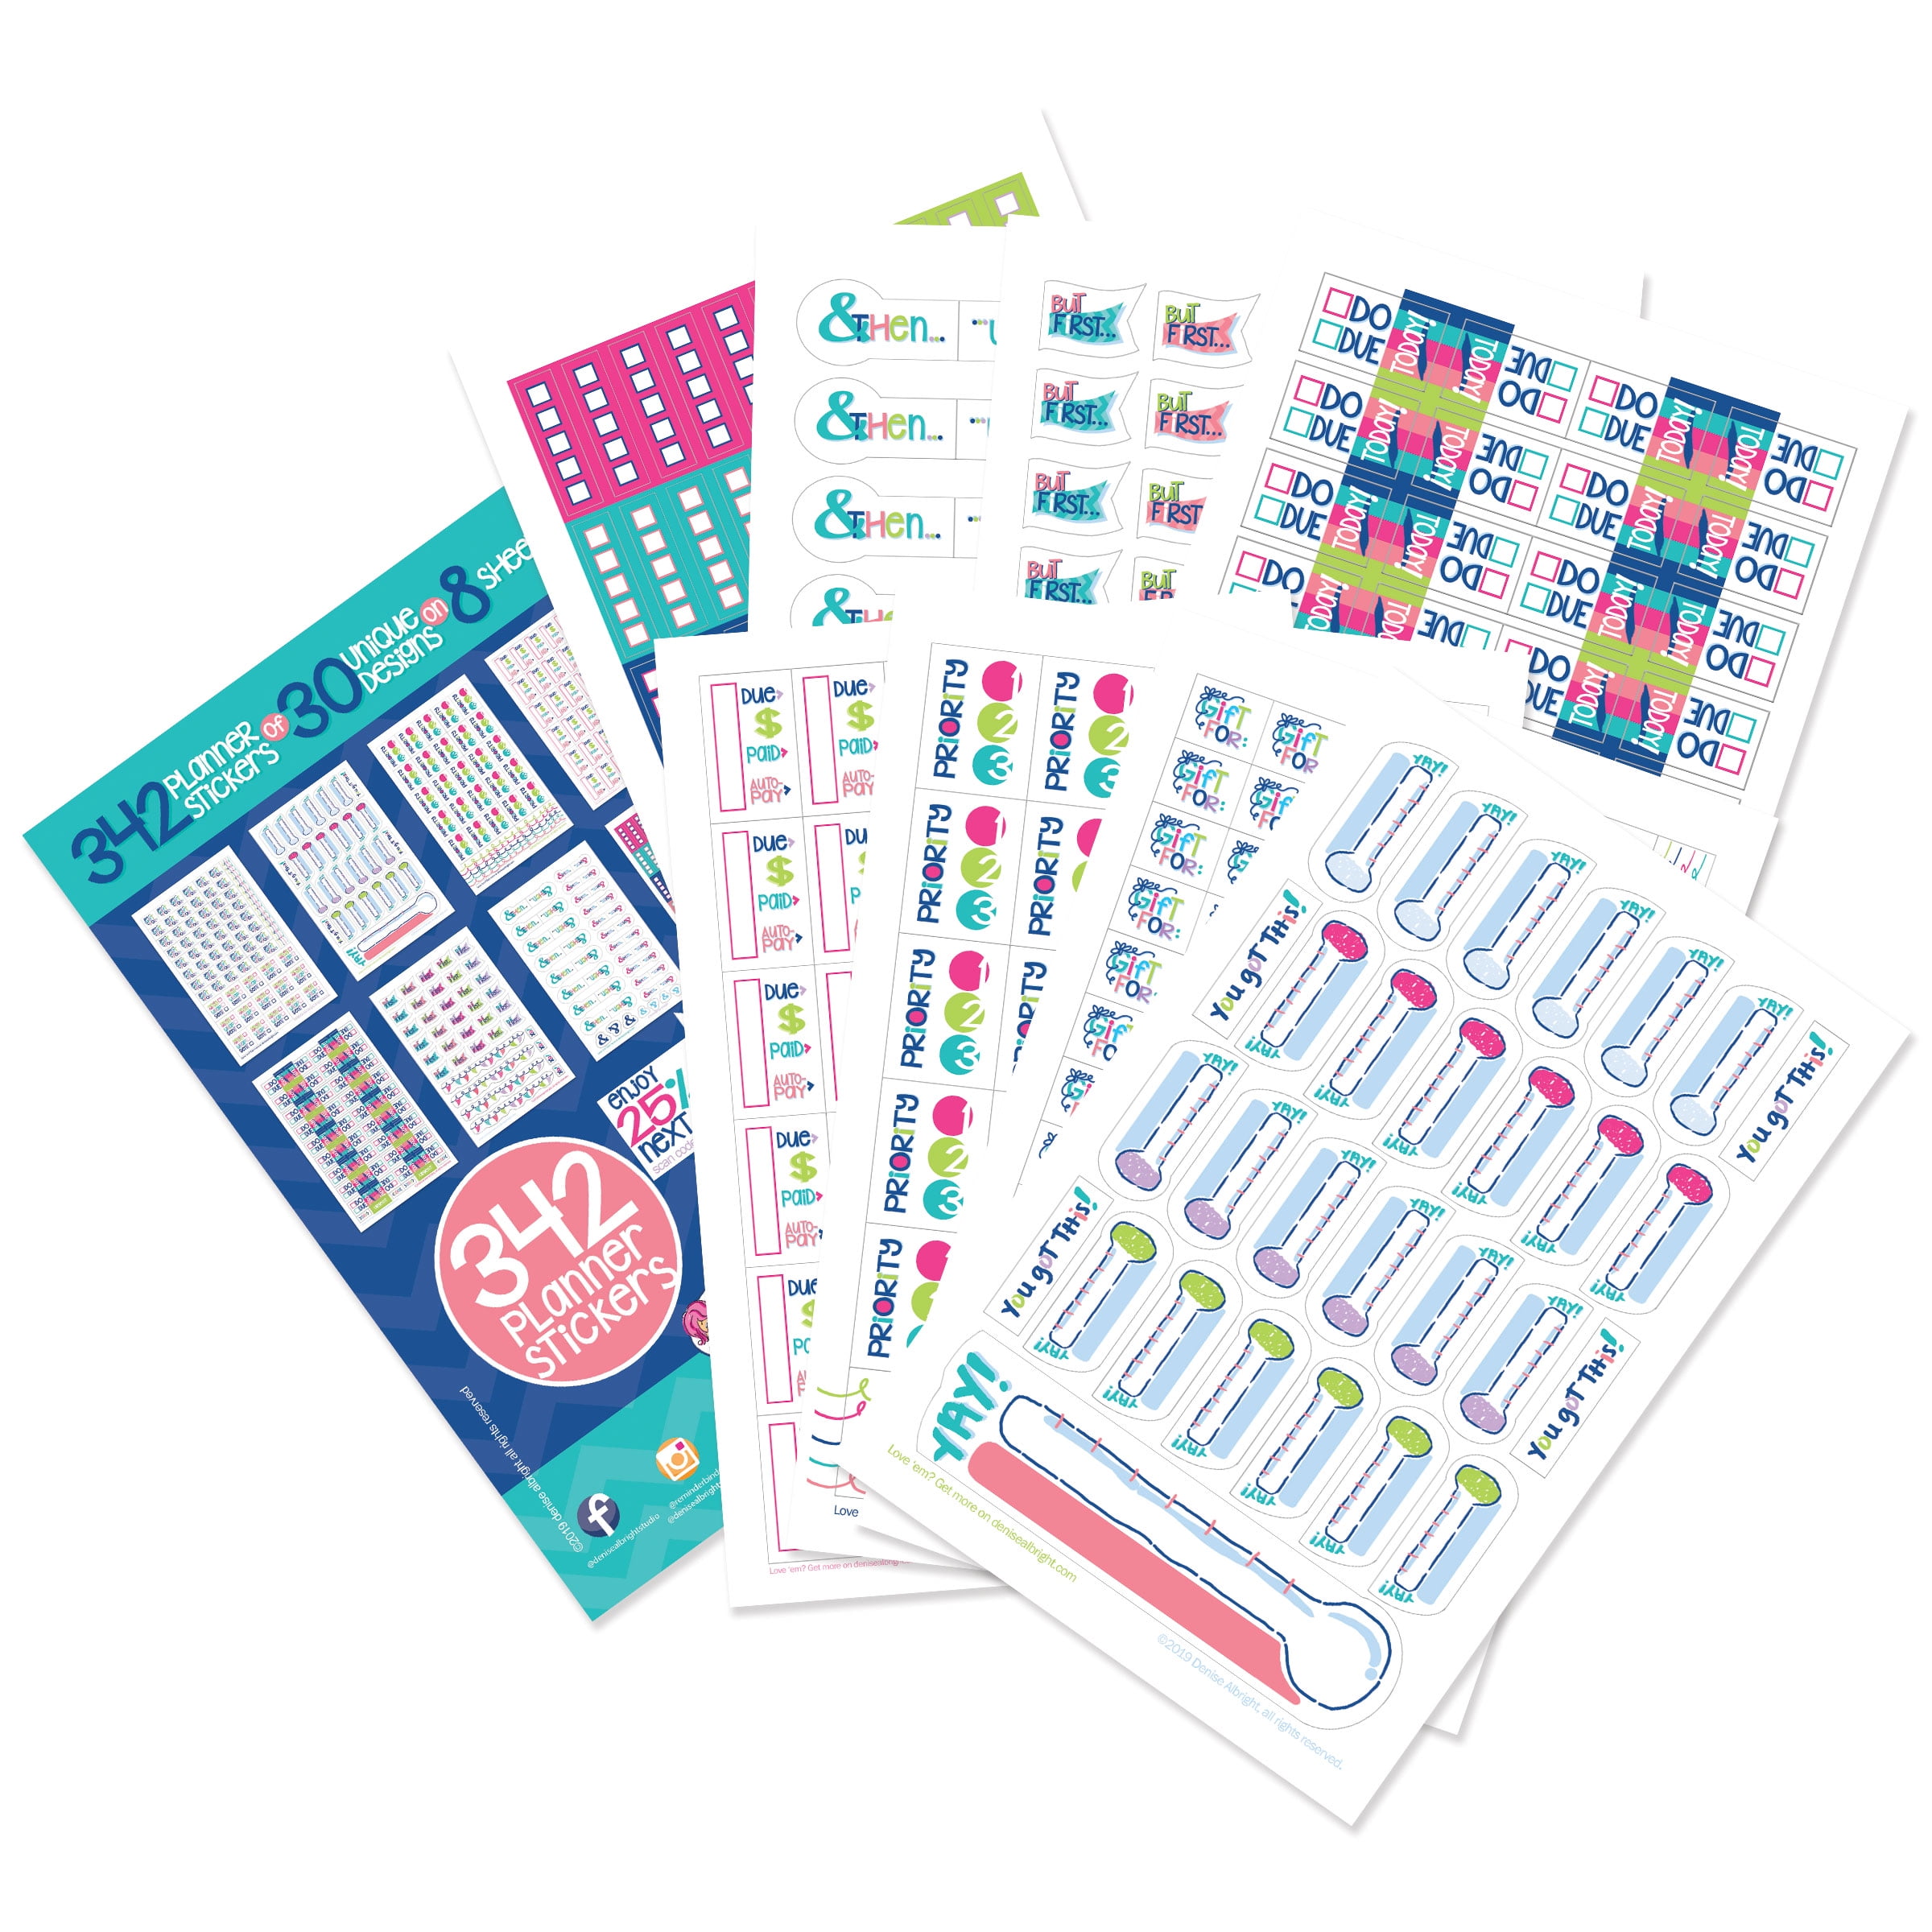 Tracker Stickers Hydration Crystals Planner Stickers Reminder Stickers Journal Stickers